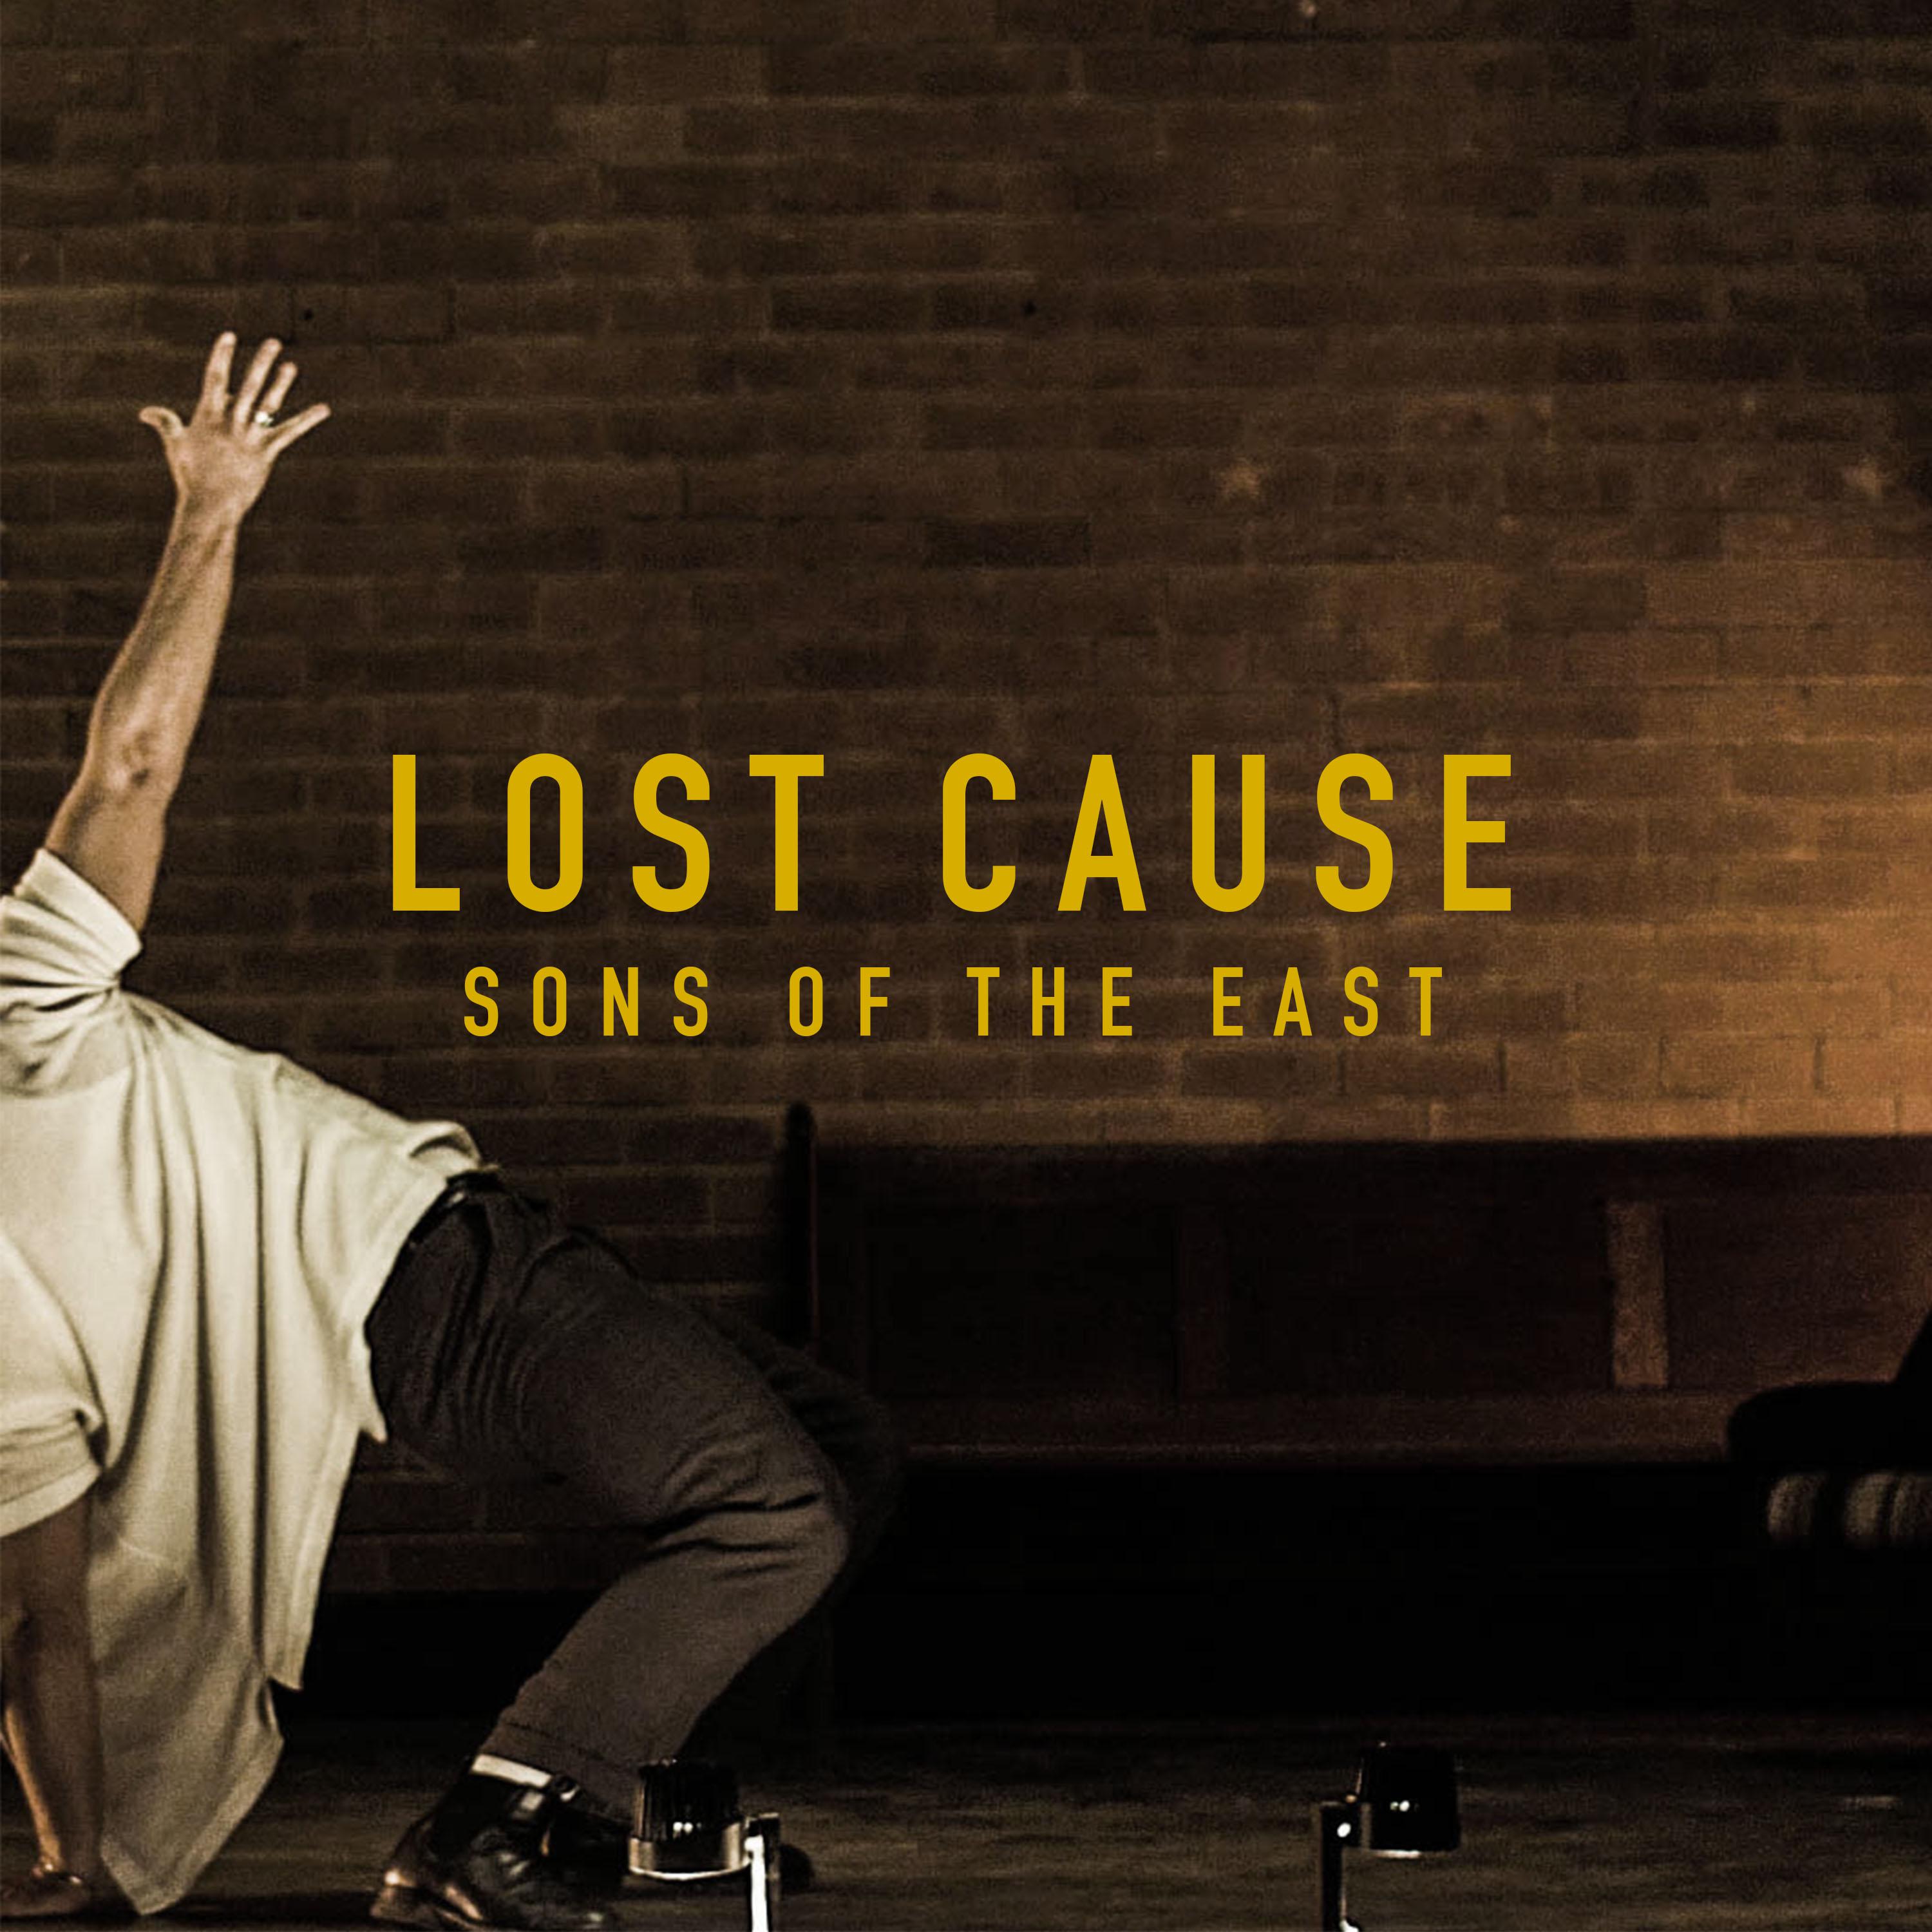 Sons Of The East - Lost Cause